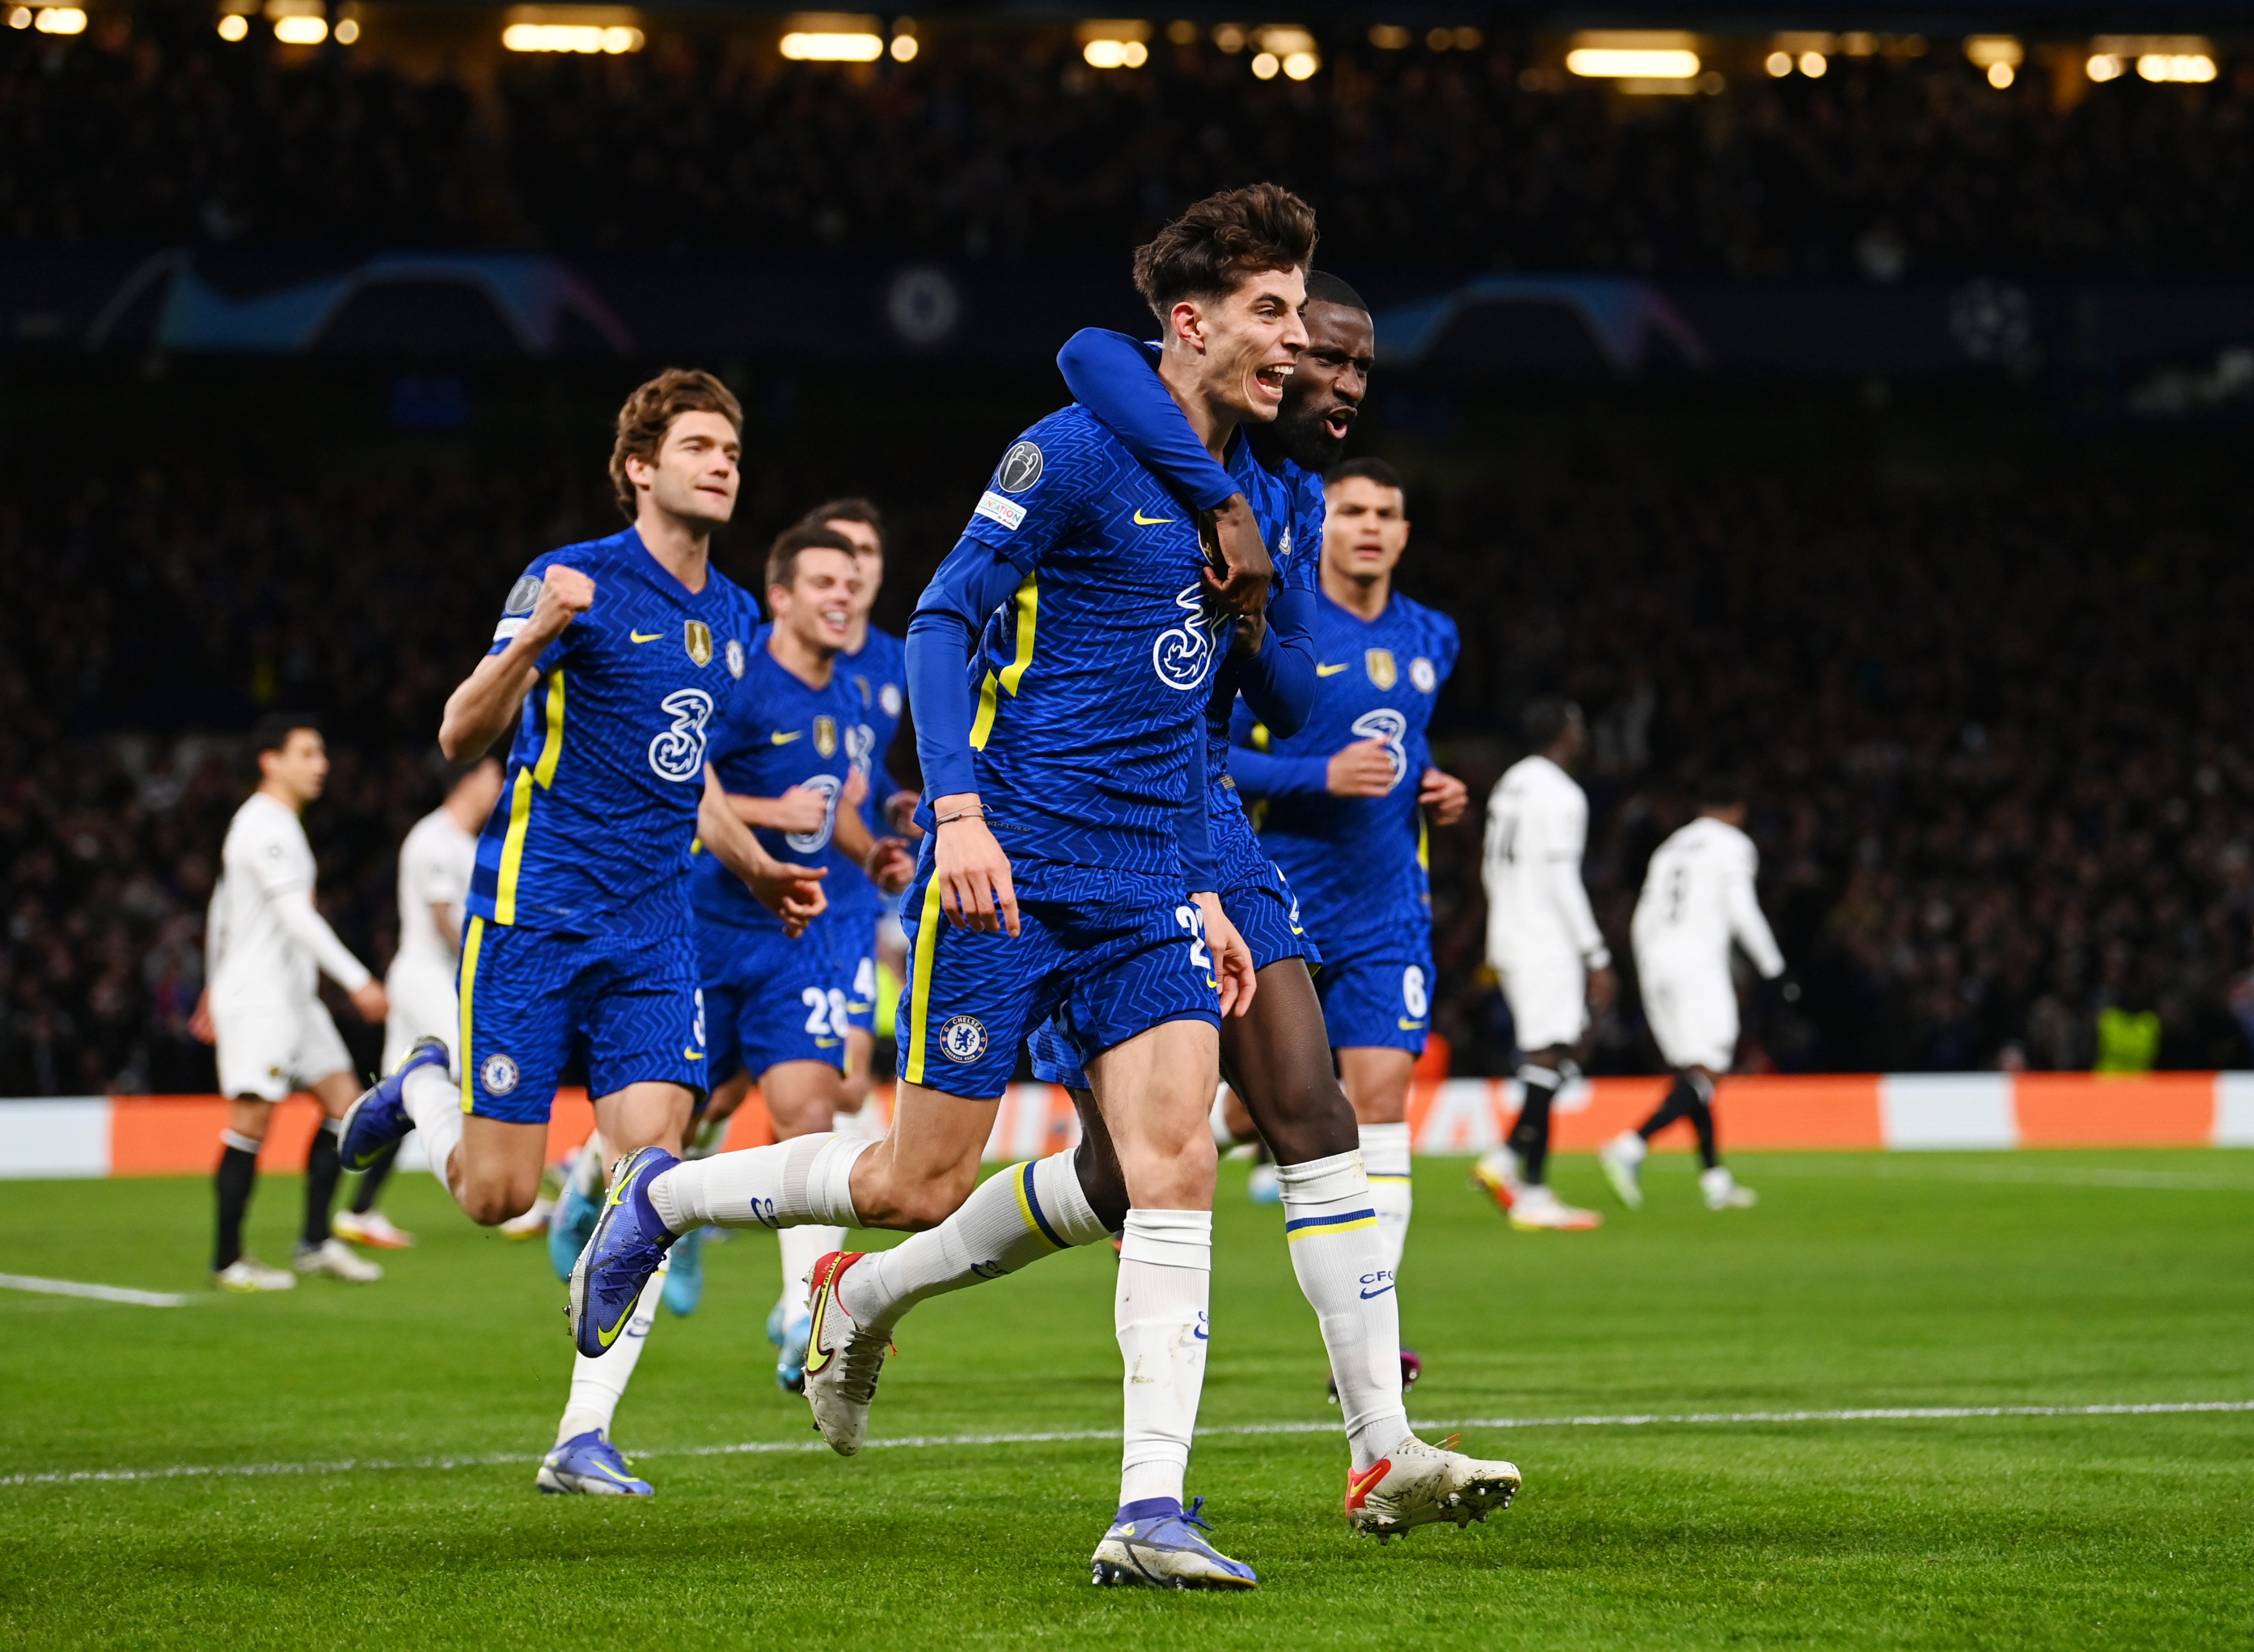 Chelsea 2-0 Lille Highlights: Kai Havertz and Christian Pulisic score the goals as Chelsea hold a two-goal advantage against LOSC Lille; Kovacic and Ziyech limp off